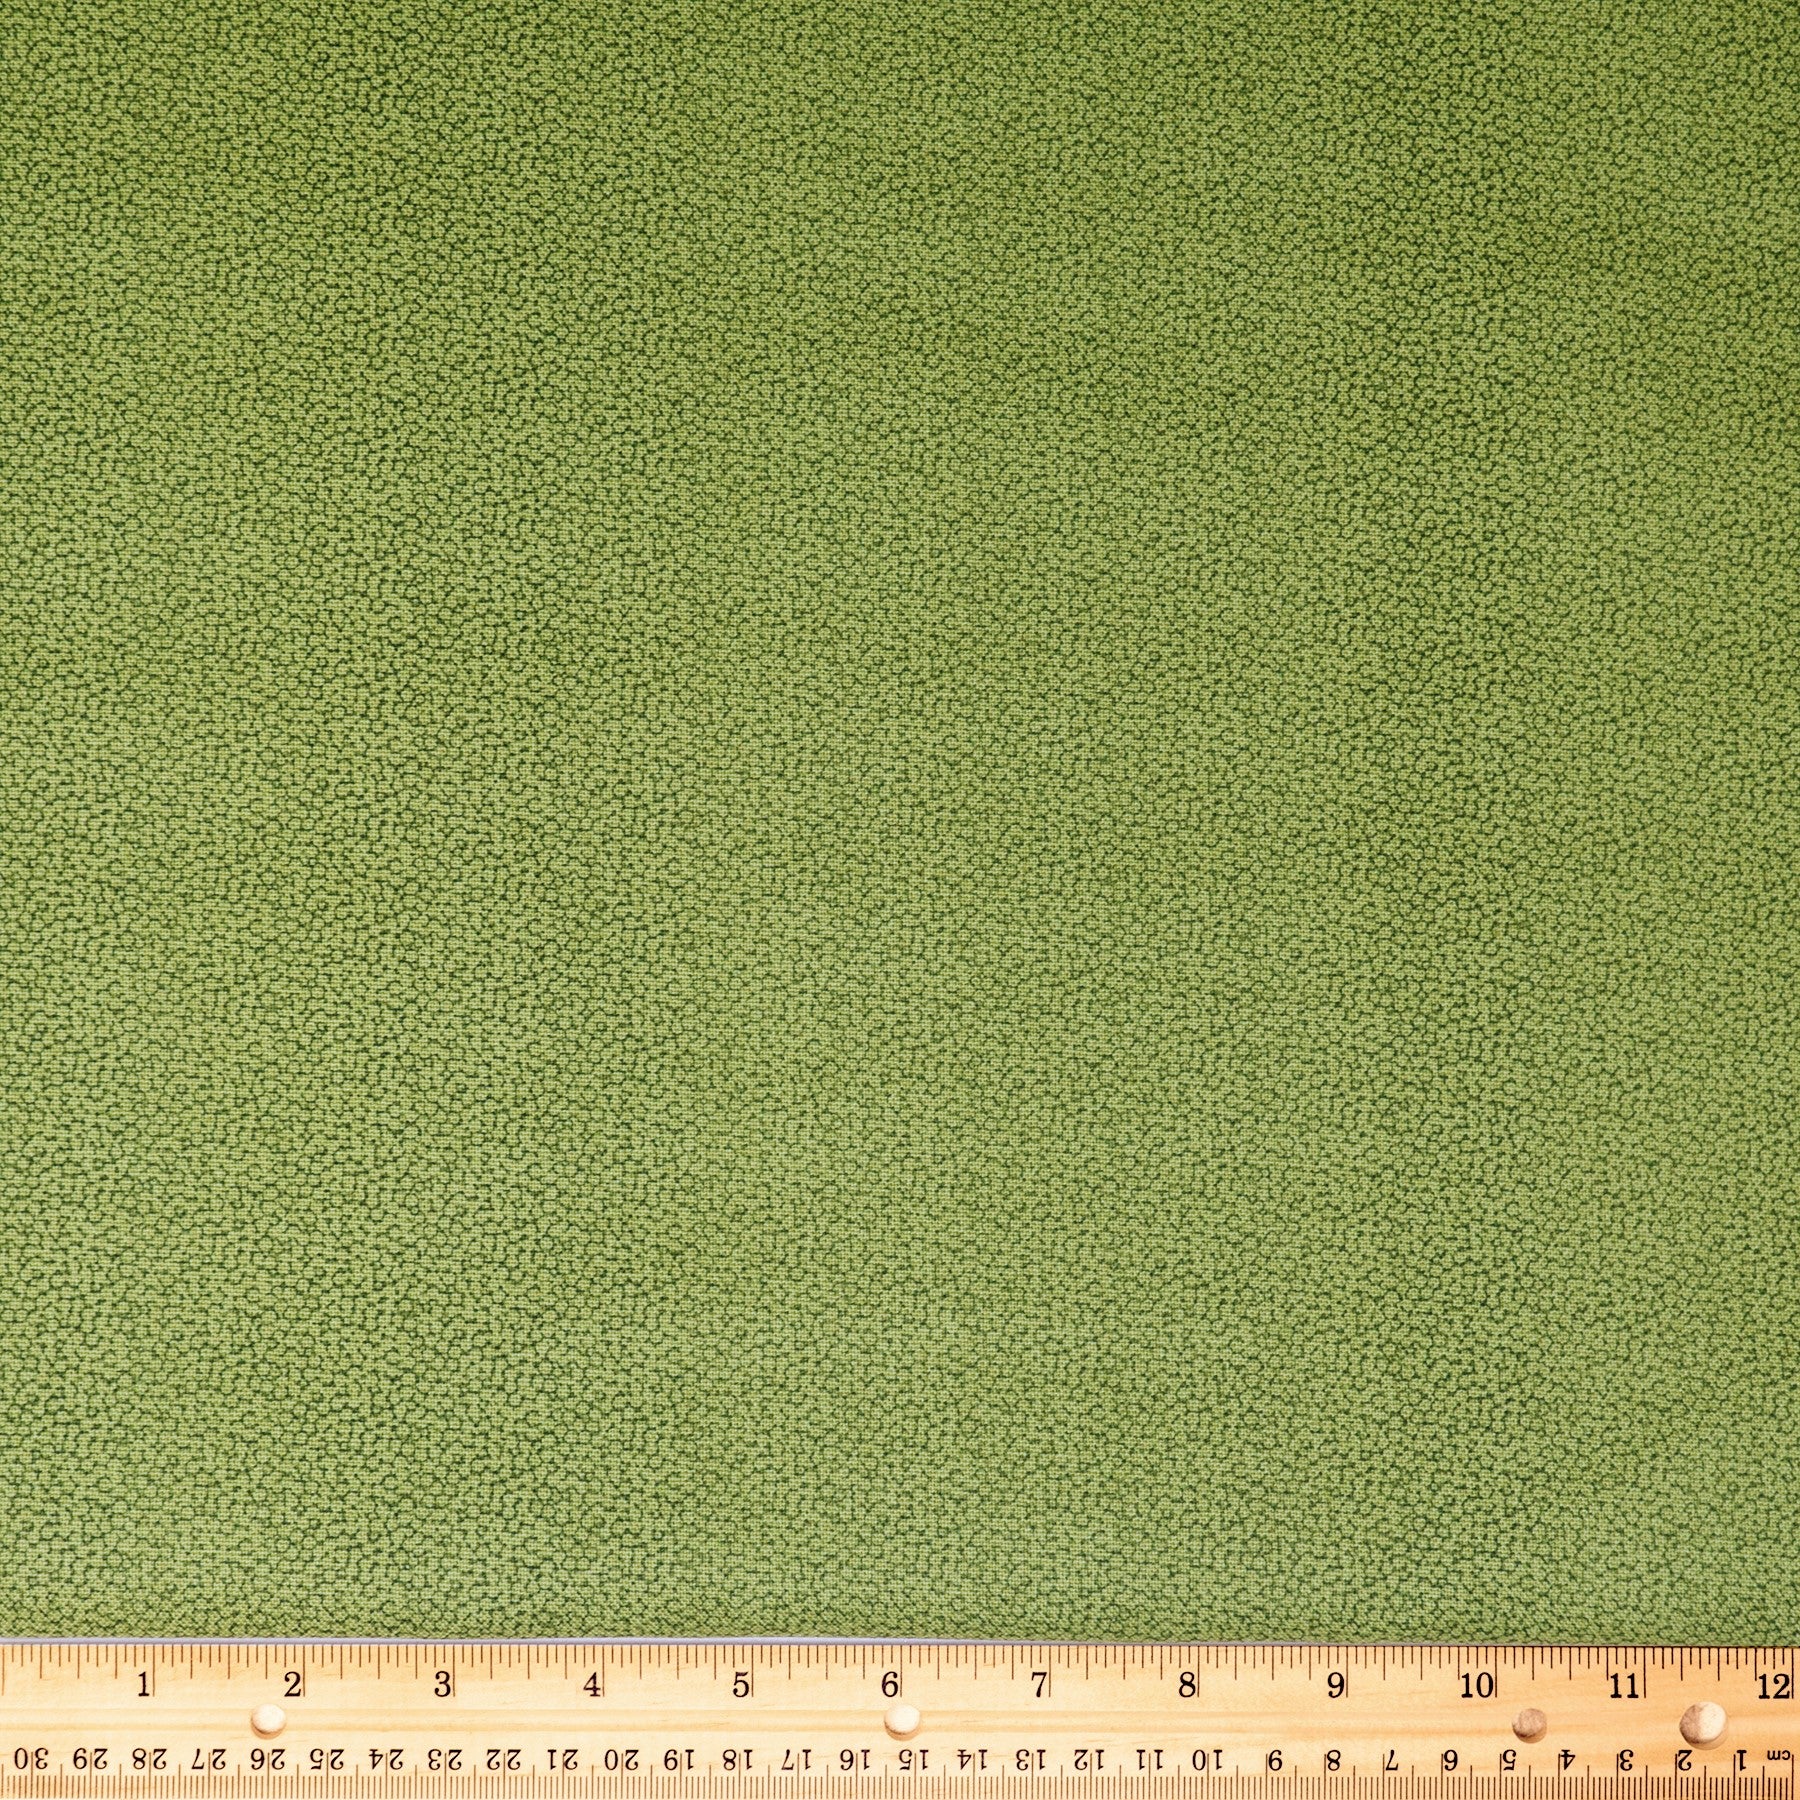 Waverly Inspirations 100% Cotton Duck 54" Texture Solid Green Color Sewing Fabric by the Yard